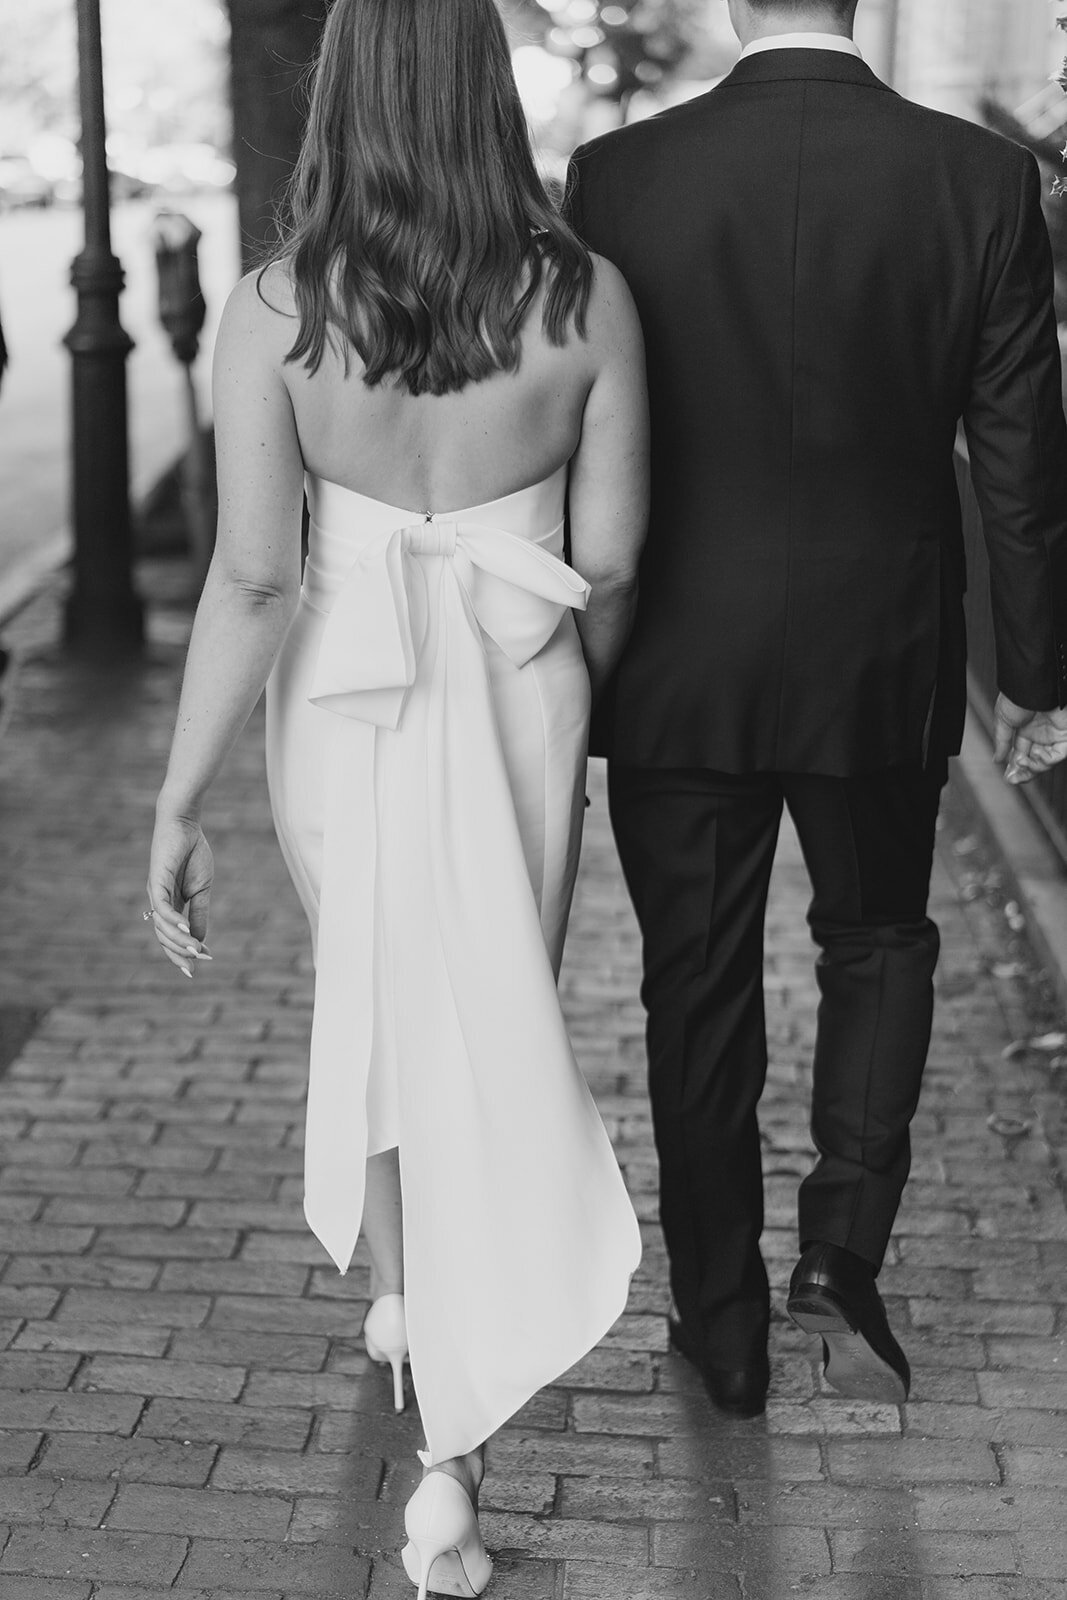 Boston wedding rehearsal dinner at the Hampshire House on Boston Common. Bride and groom holding hands on the brick sidewalk to their welcome dinner. White rehearsal dinner dress with big bow on the back.